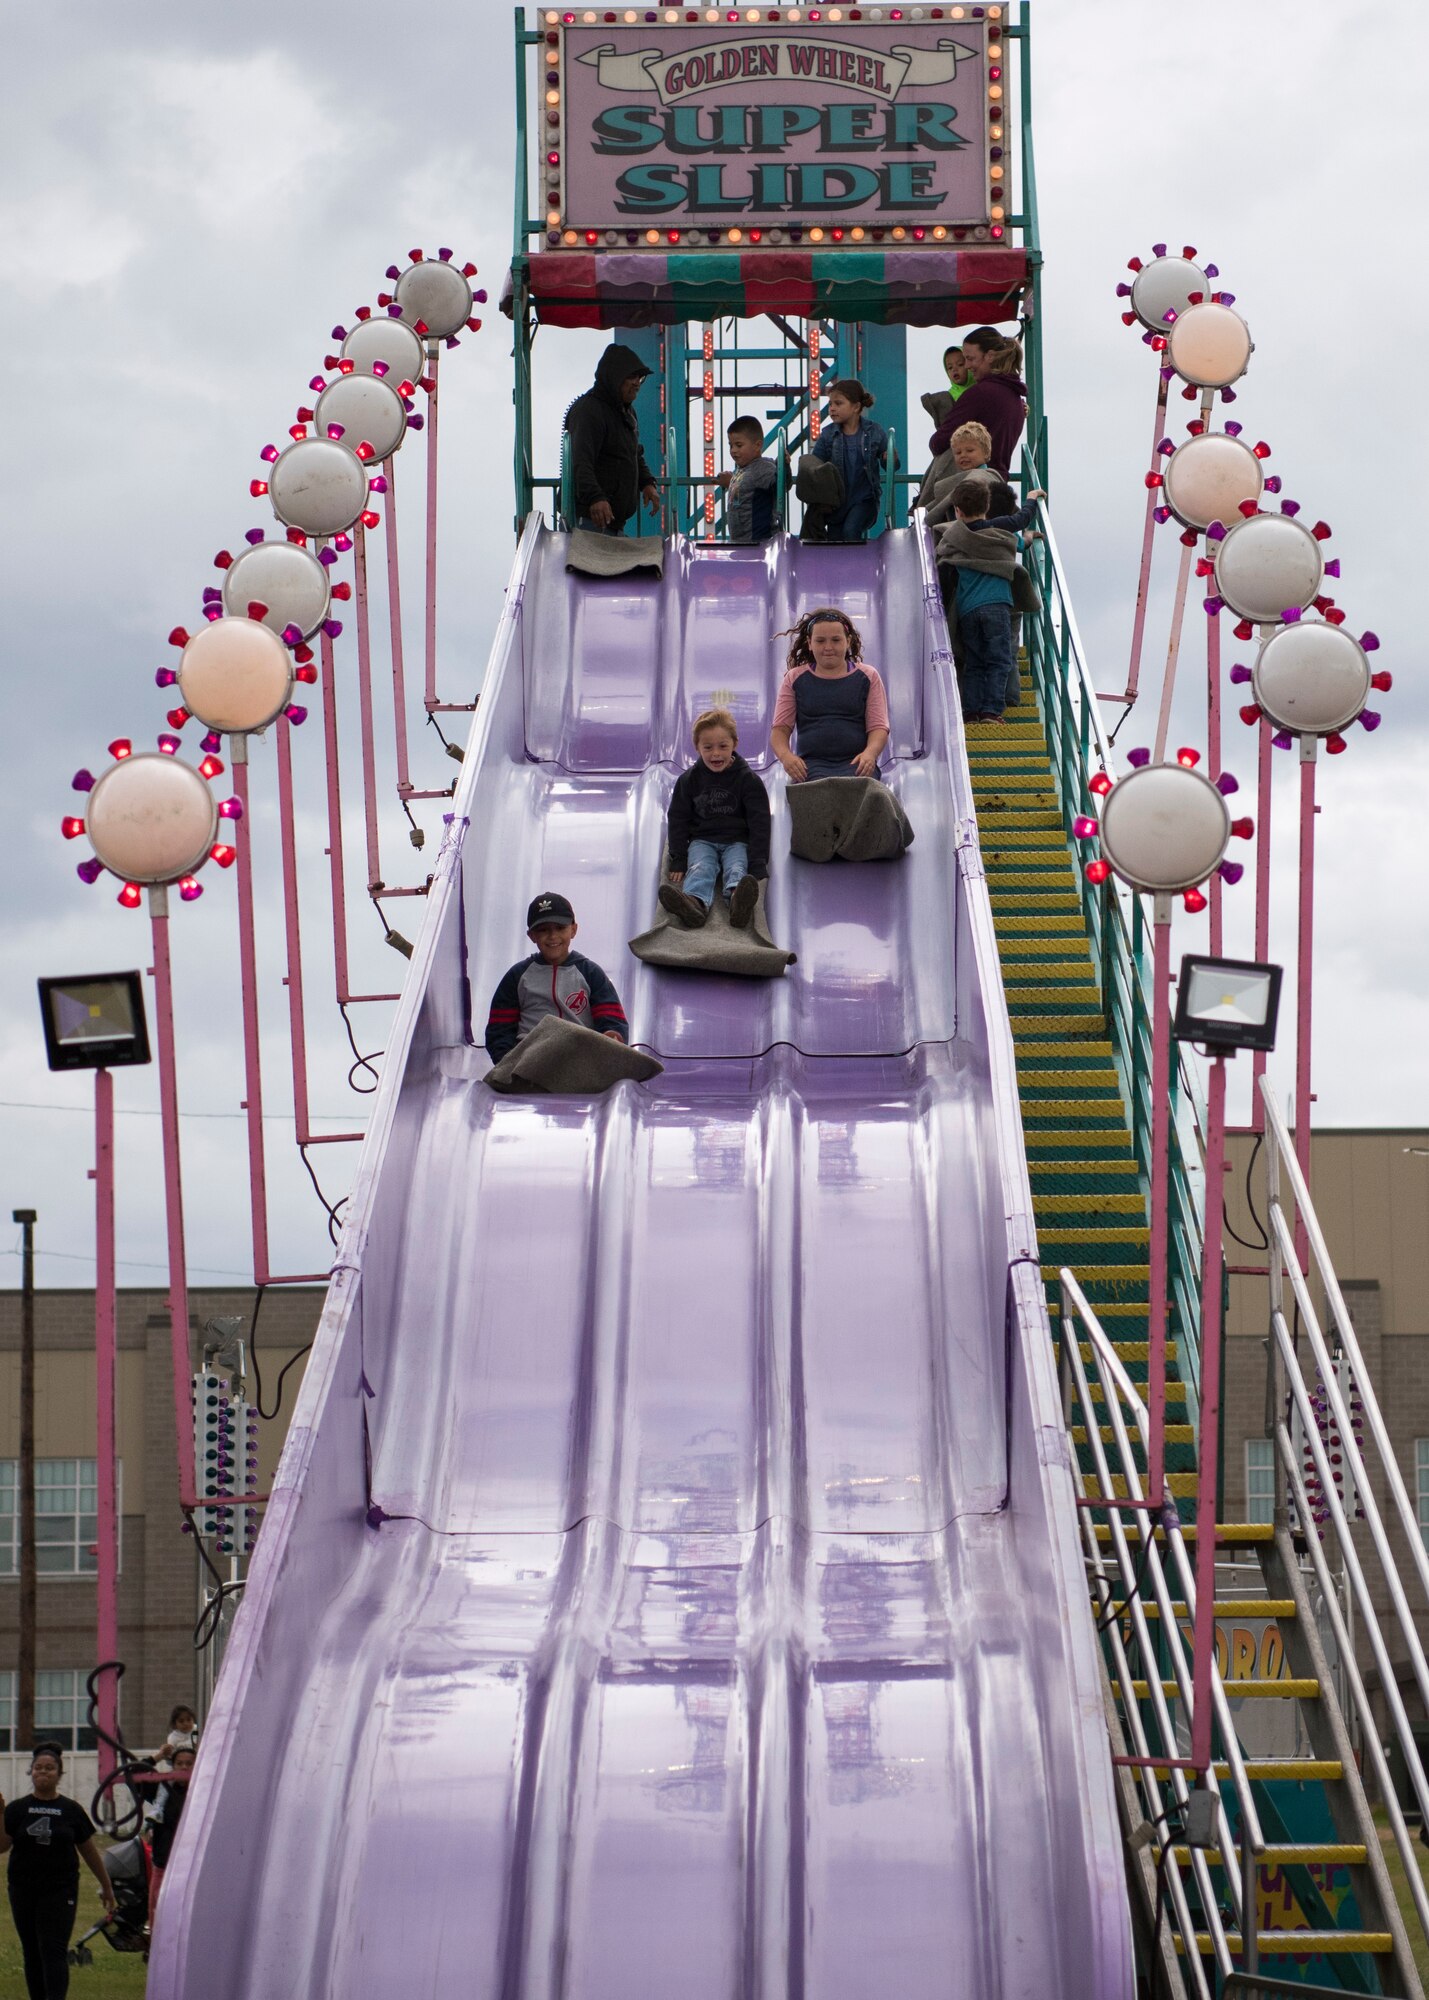 Children ride the “Golden Wheel Super Slide” during the 3rd annual Summer Fest hosted by the 673d Force Support Squadron at Joint Base Elmendorf-Richardson, Alaska, July 8, 2018. The event was open to anyone with base access and offered free activities such as carnival rides, a petting zoo, face painting, a bungee trampoline, and carnival games.